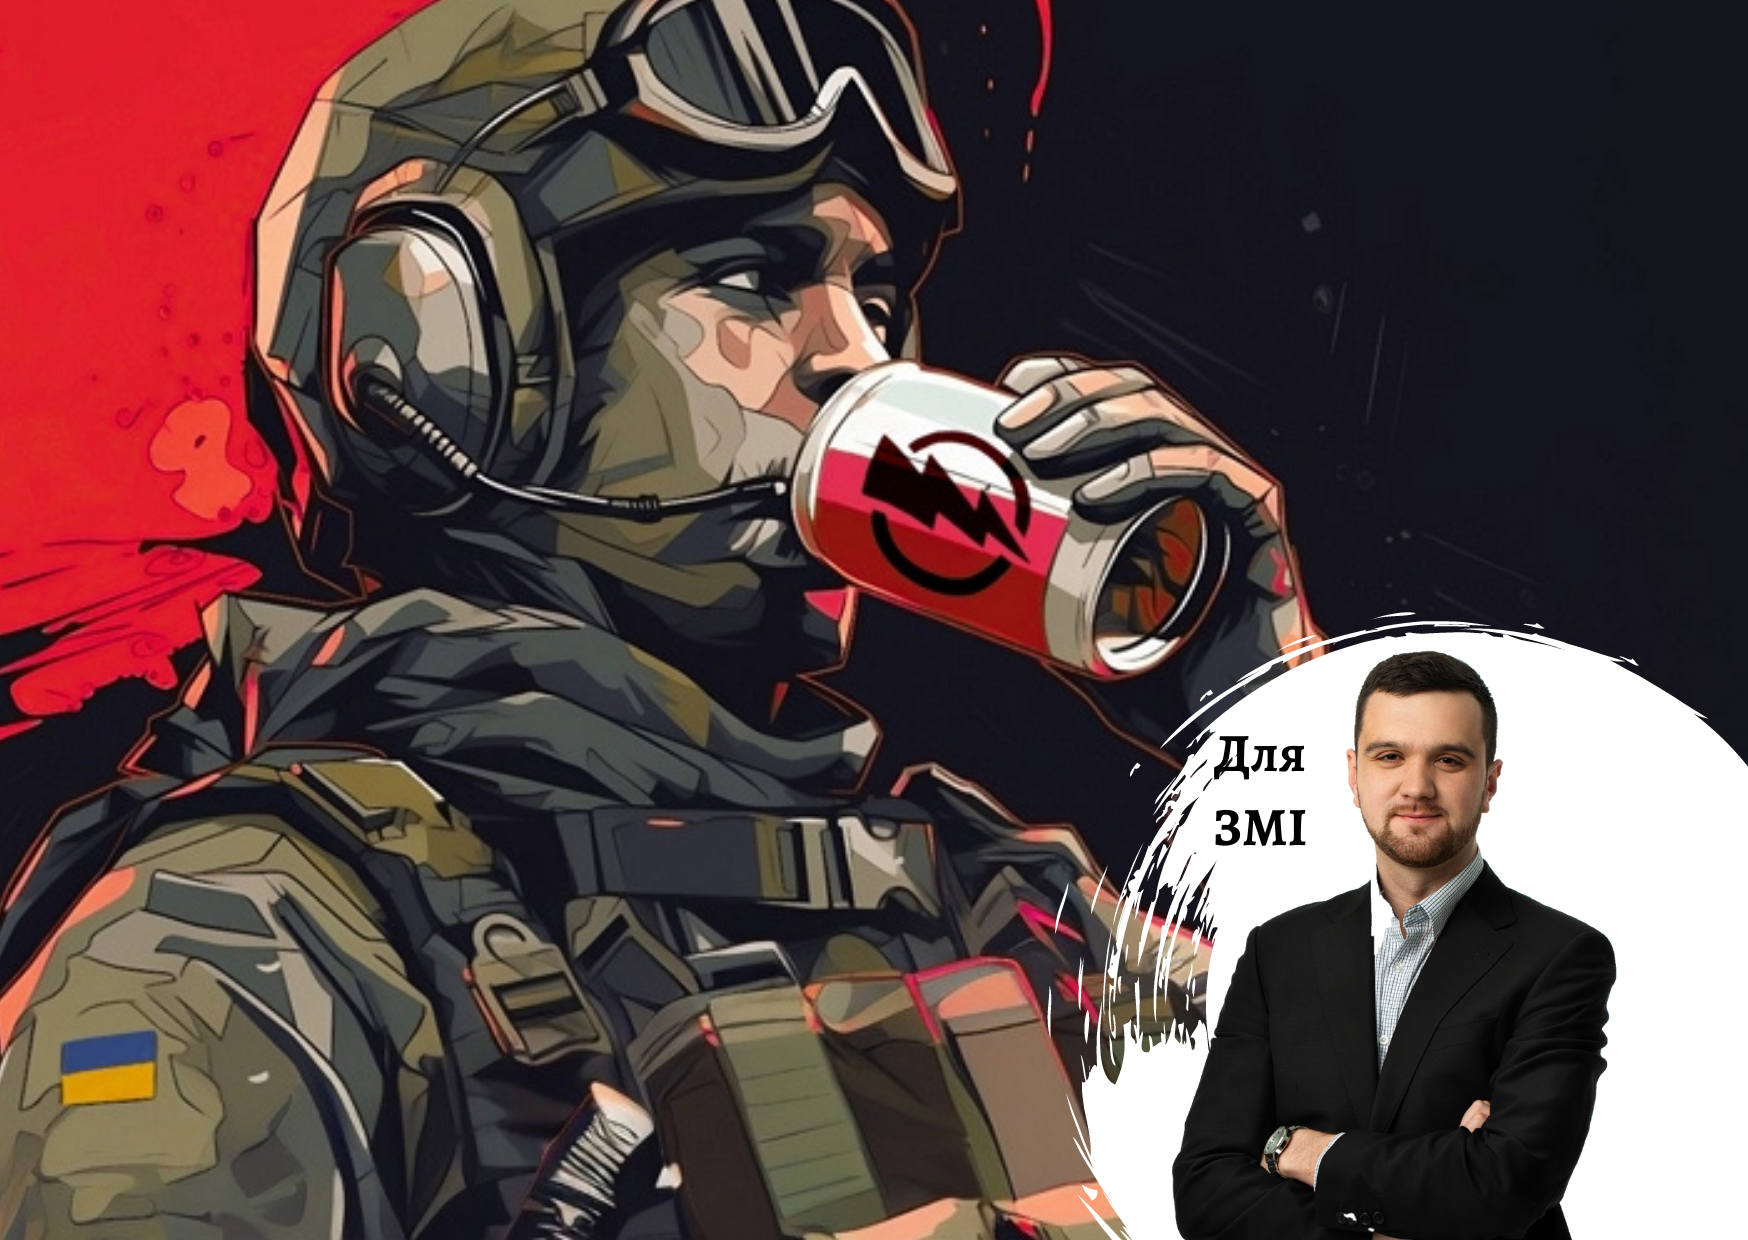 The war cheered up the Ukrainian market of energy drinks - comments by Pro-Consulting Senior Consultant Andrii Mokriakov. LIGA.NET